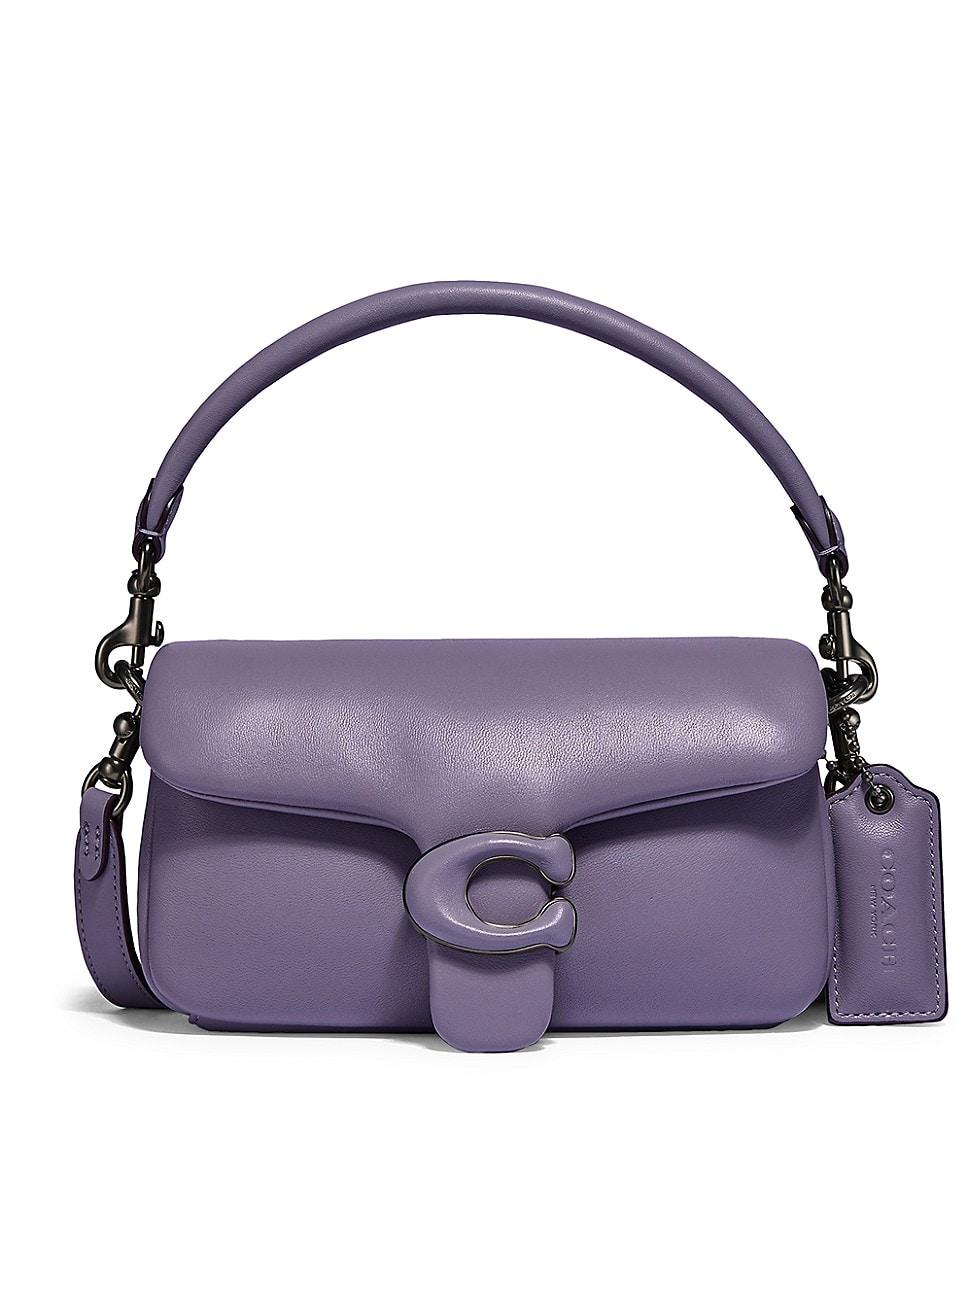 COACH Pillow Tabby 18 Leather Shoulder Bag in Purple | Lyst